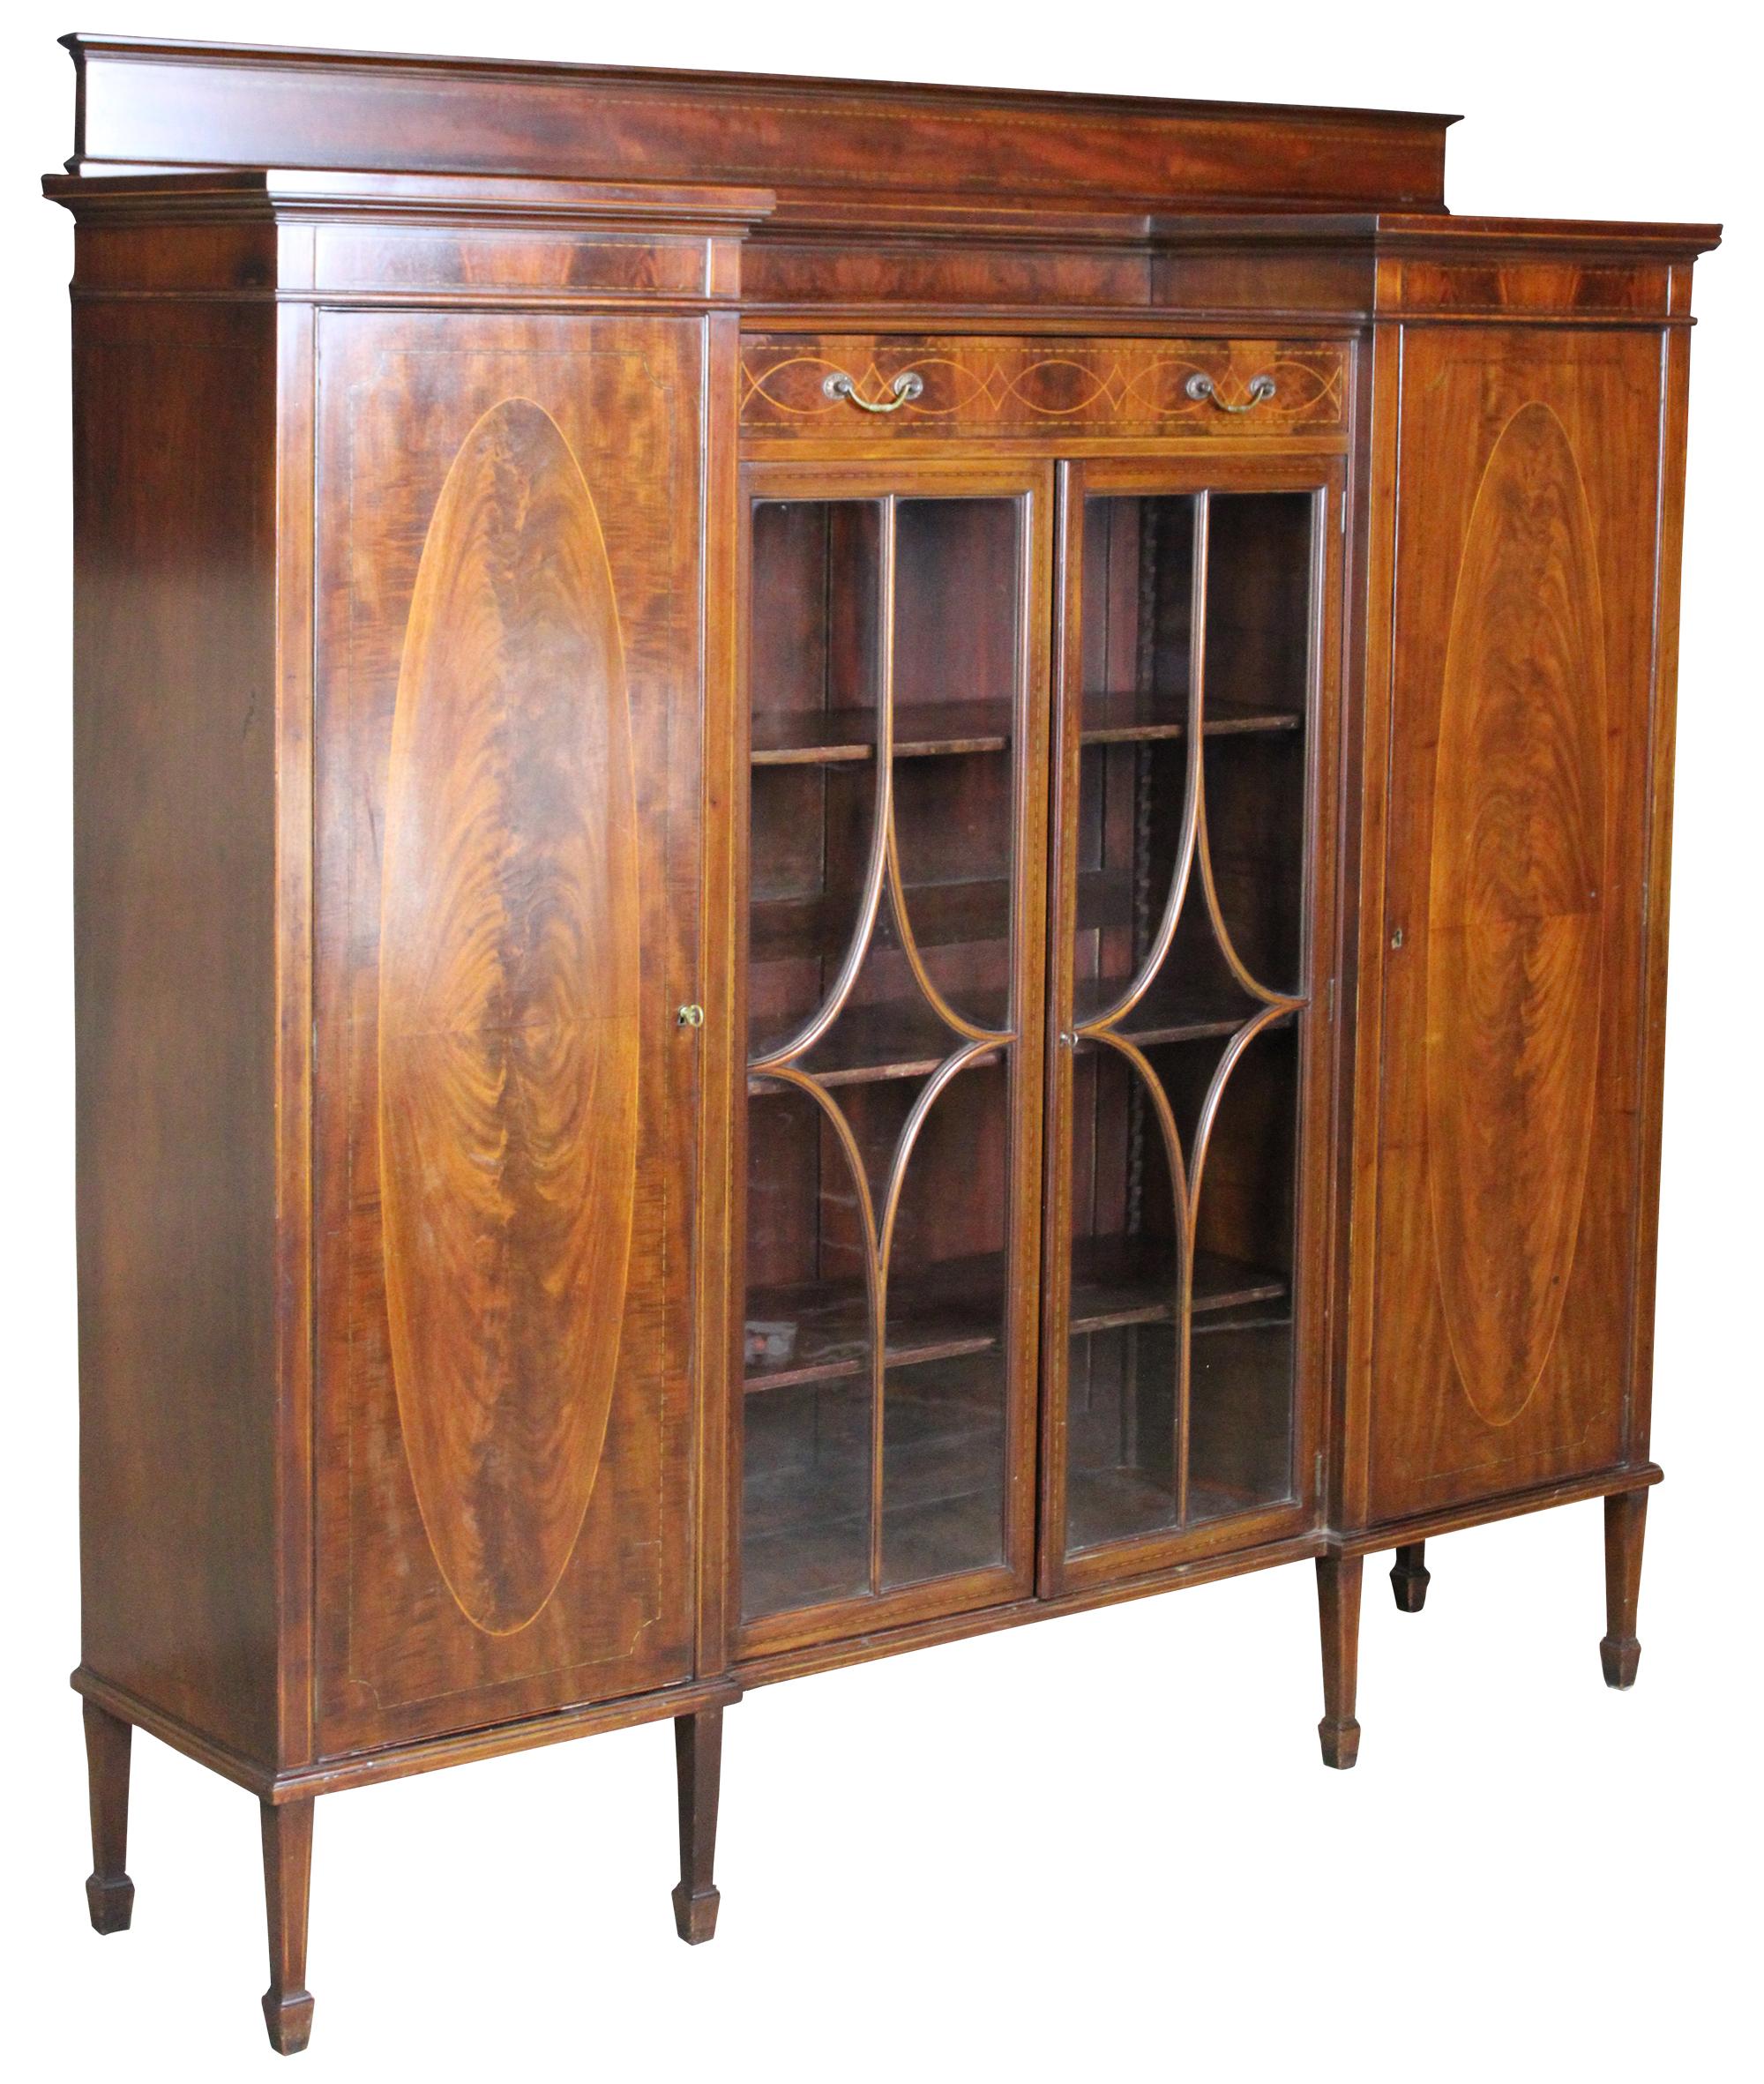 Monumental early 19th century Sheraton library bookcase. Features a central curio cabinet and upper drawer flanked by outer bookcases. Made from crotch (flamed) mahogany with beautifully burled doors, satinwood inlay, diamond pattern fretwork and